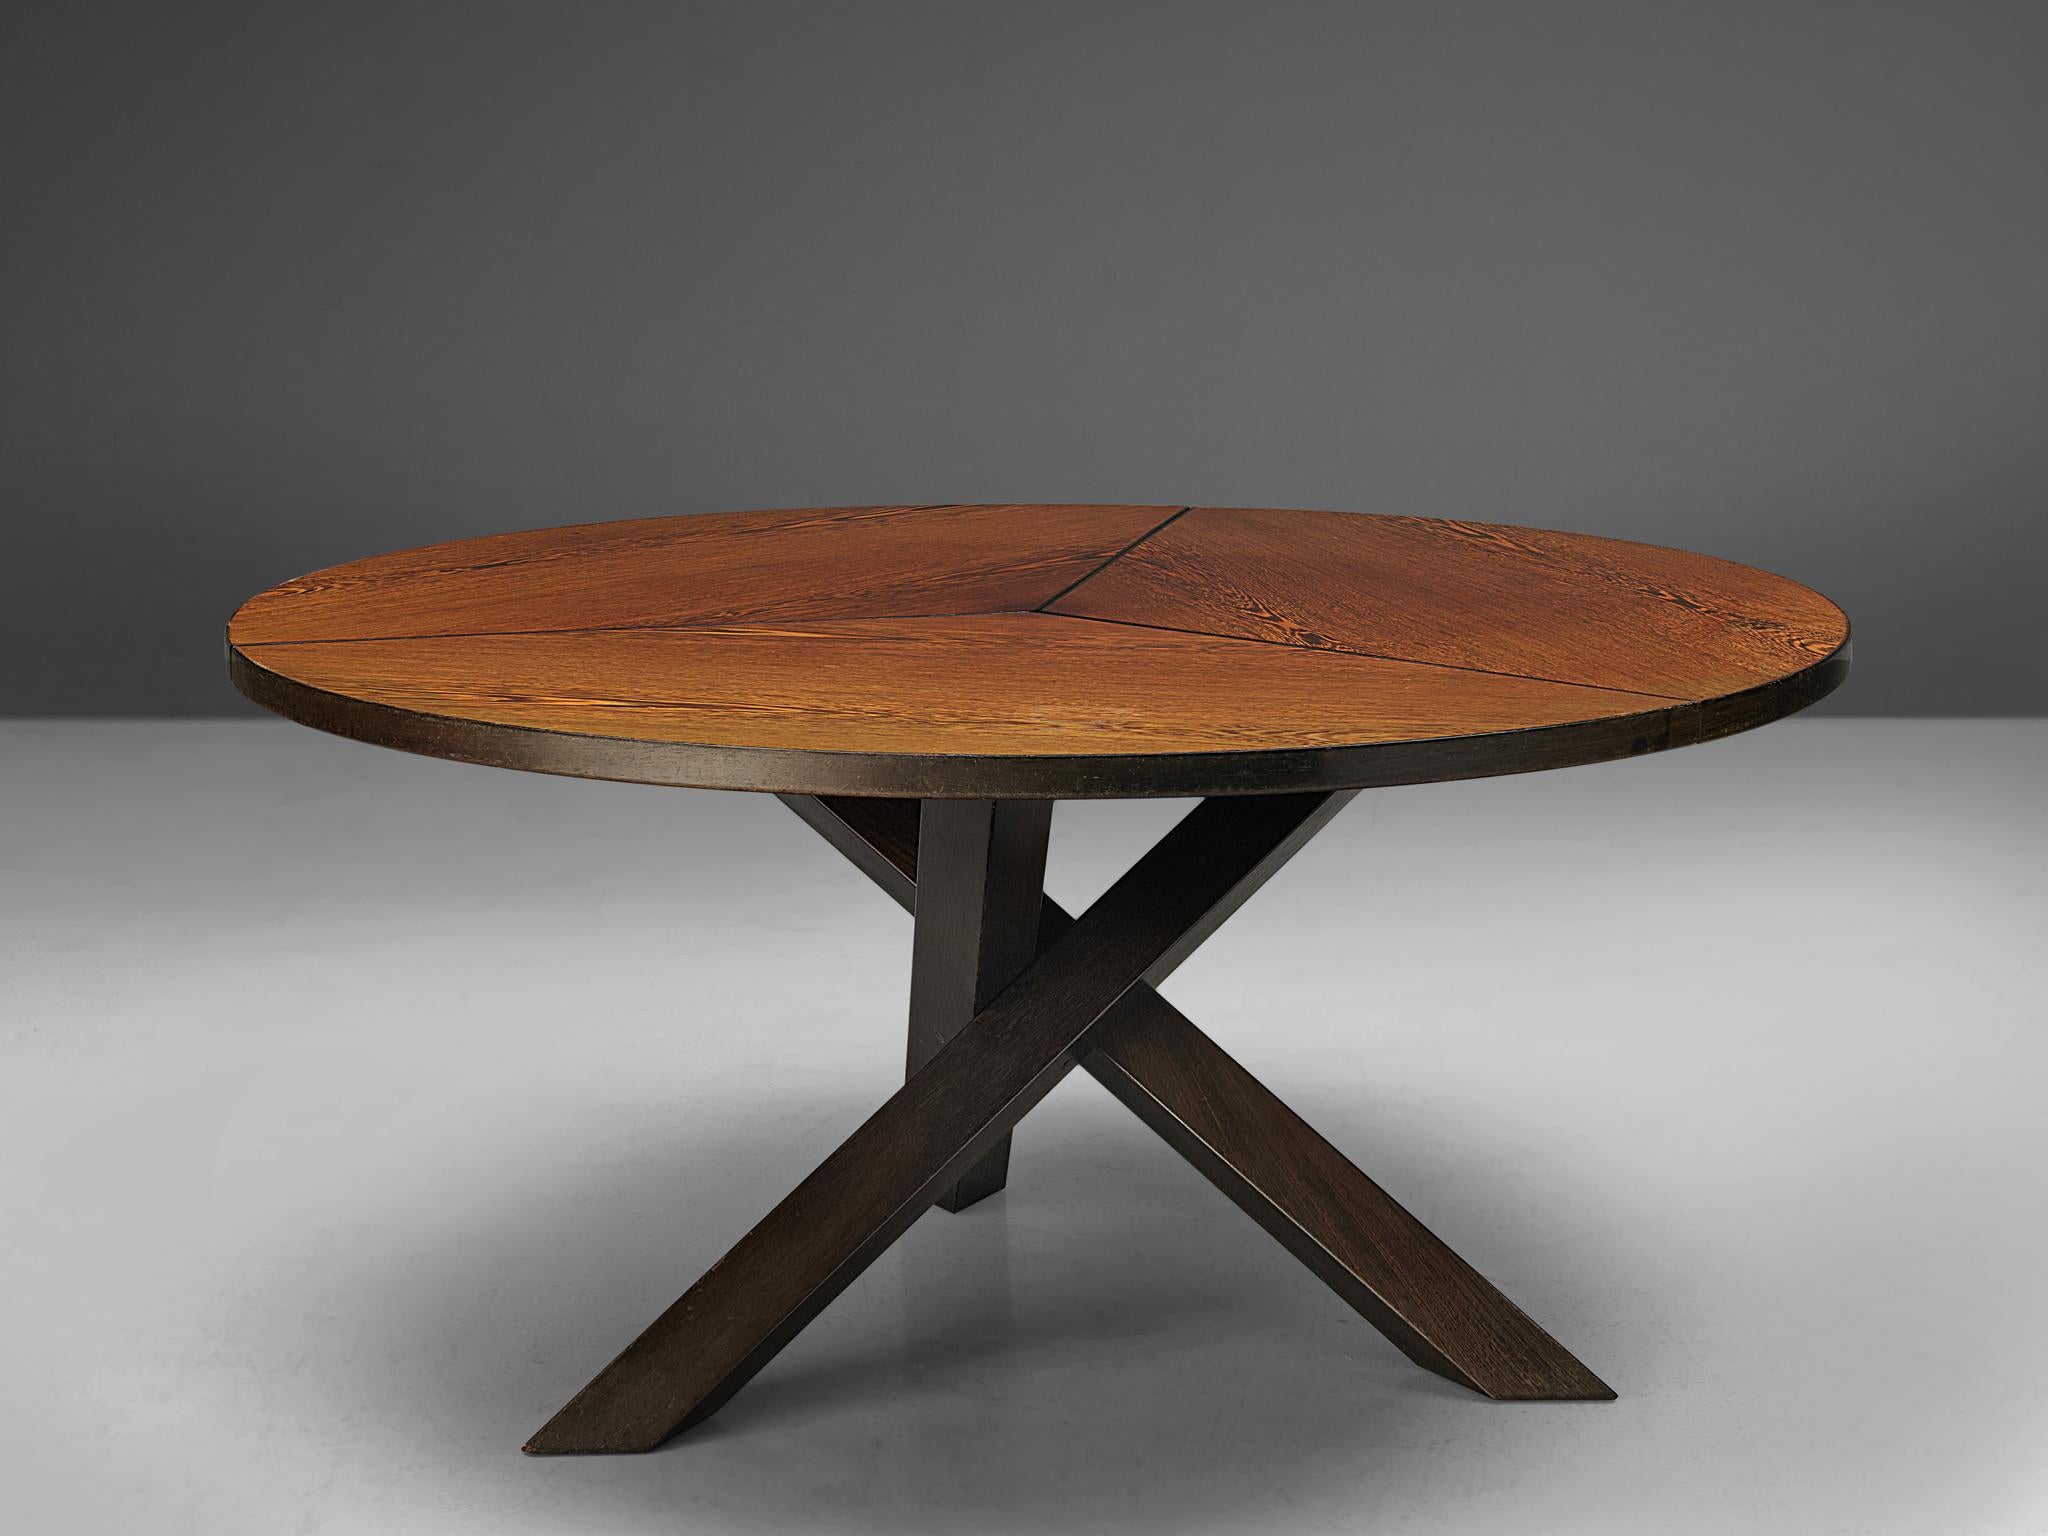 Martin Visser for 't Spectrum, dining table, wengé and wood, the Netherlands, 1960s.

Beautiful wengé dining table with round top, visually divided into three parts. The base consist of three crossed legs of solid, darkened wood. The veneer top